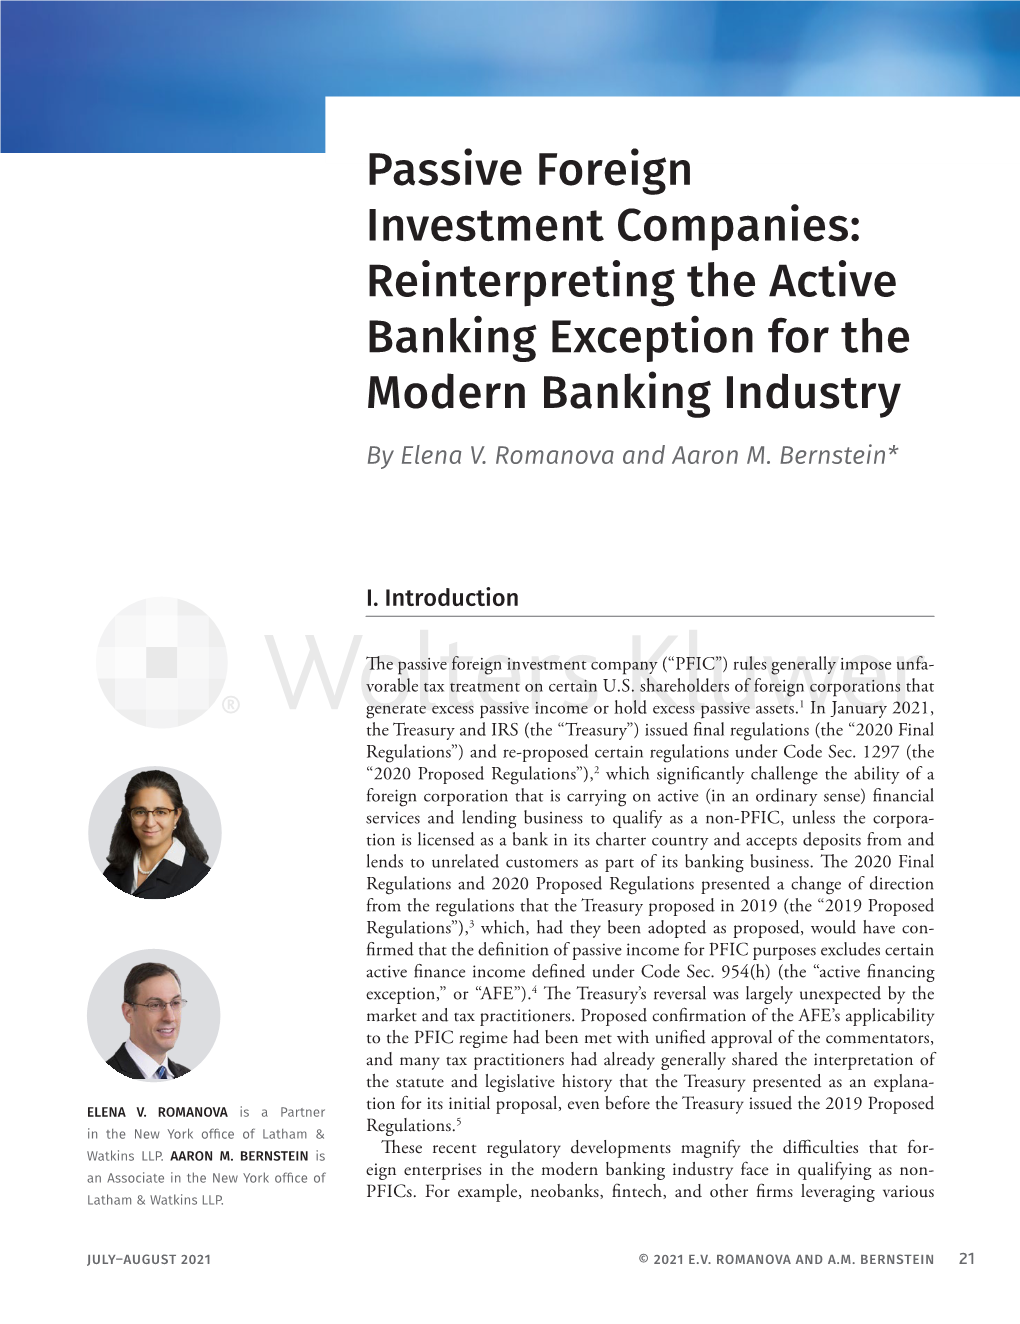 Passive Foreign Investment Companies: Reinterpreting the Active Banking Exception for the Modern Banking Industry by Elena V